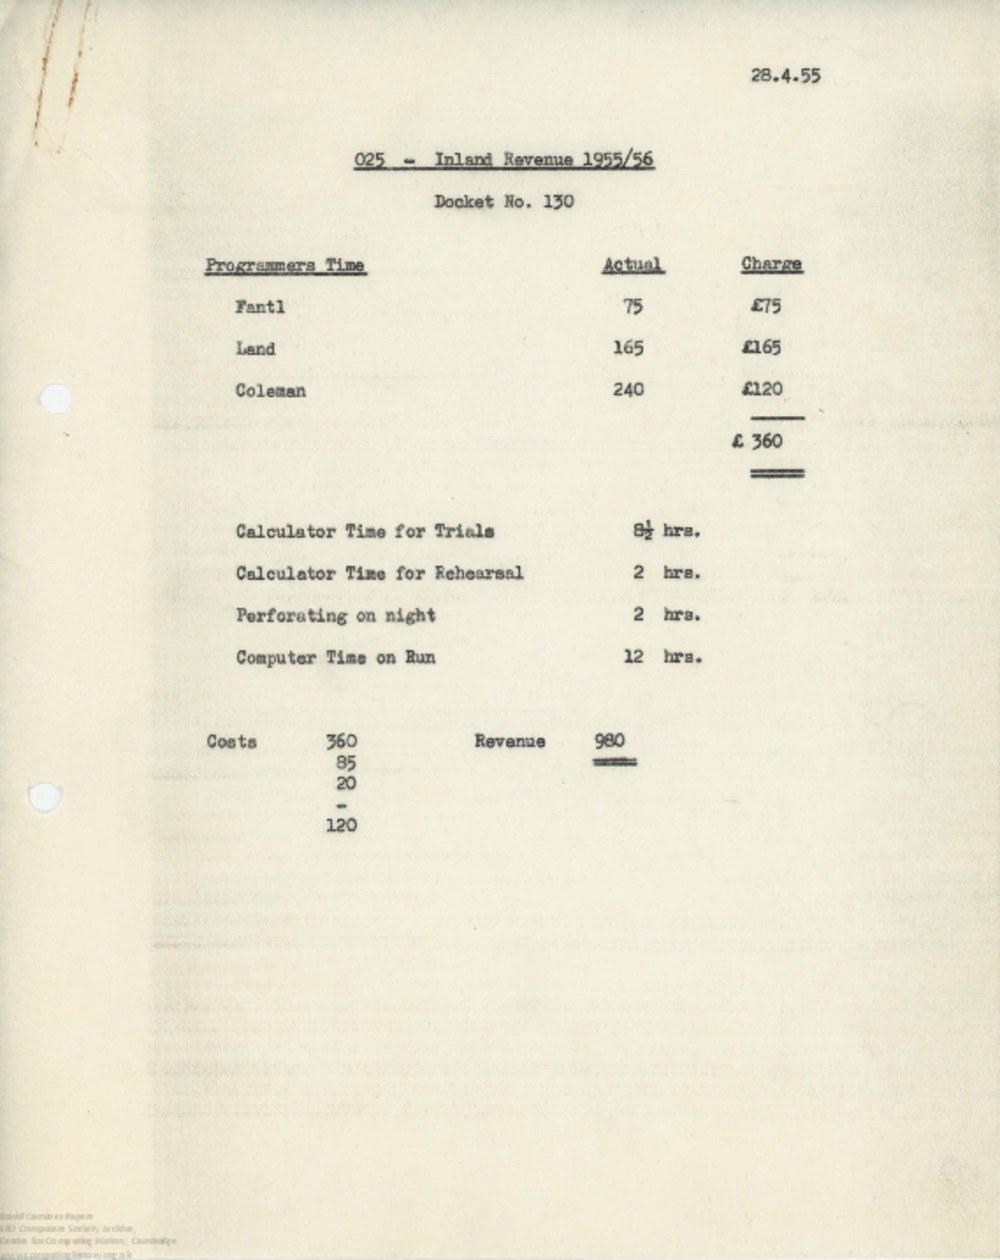 Article: 62946 Docket No 130: Summary of Programmers Time, 28th Apr 1955